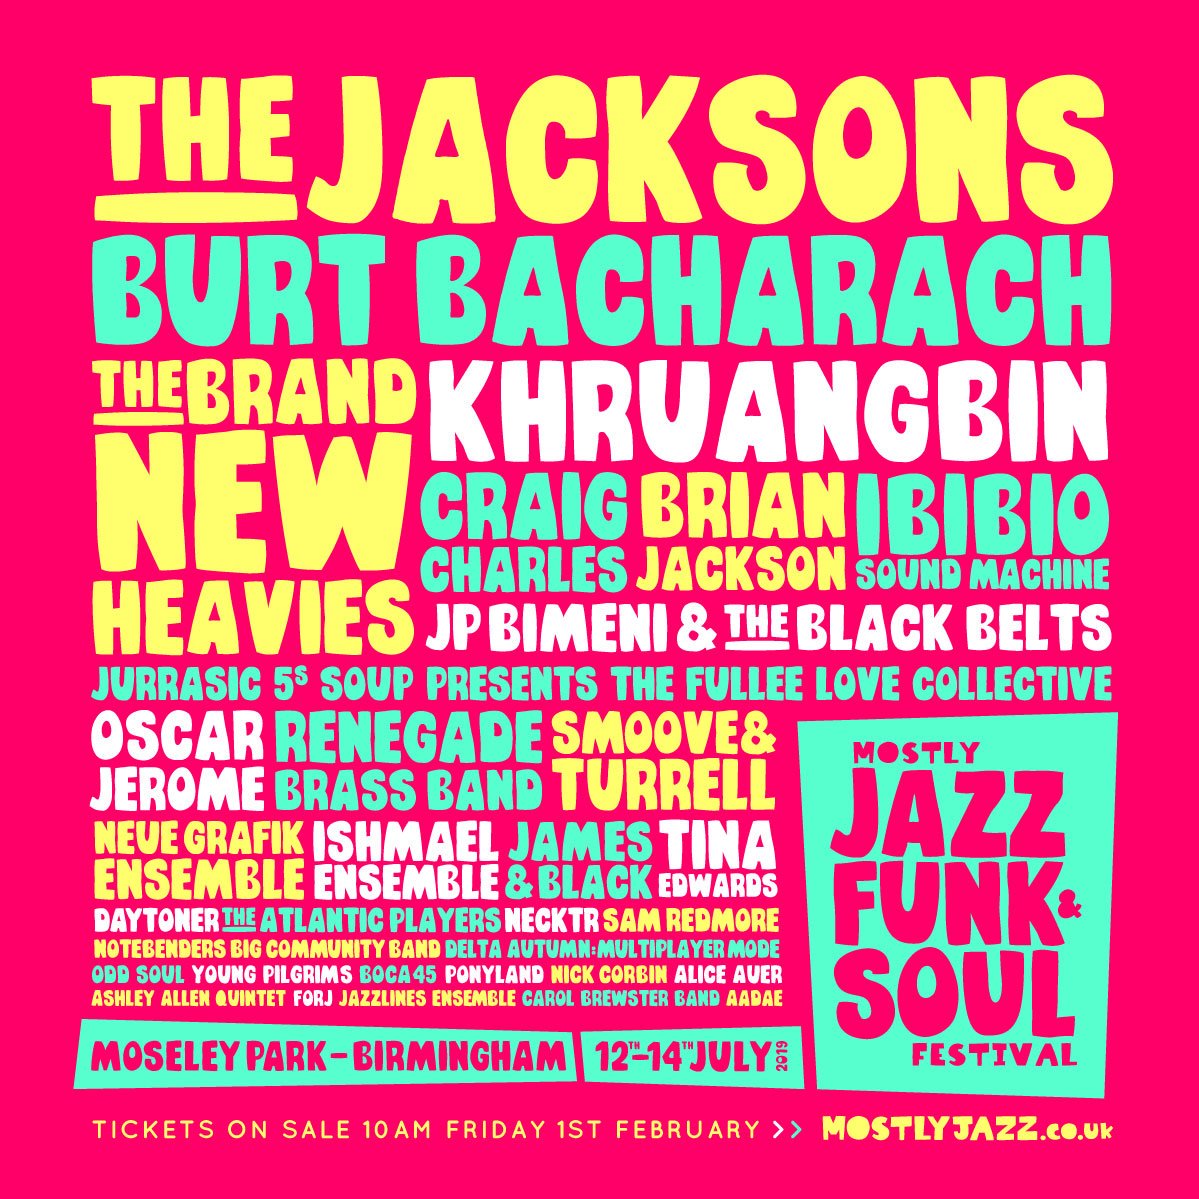 PREVIEW: Mostly Jazz, Funk & Soul Festival 2019